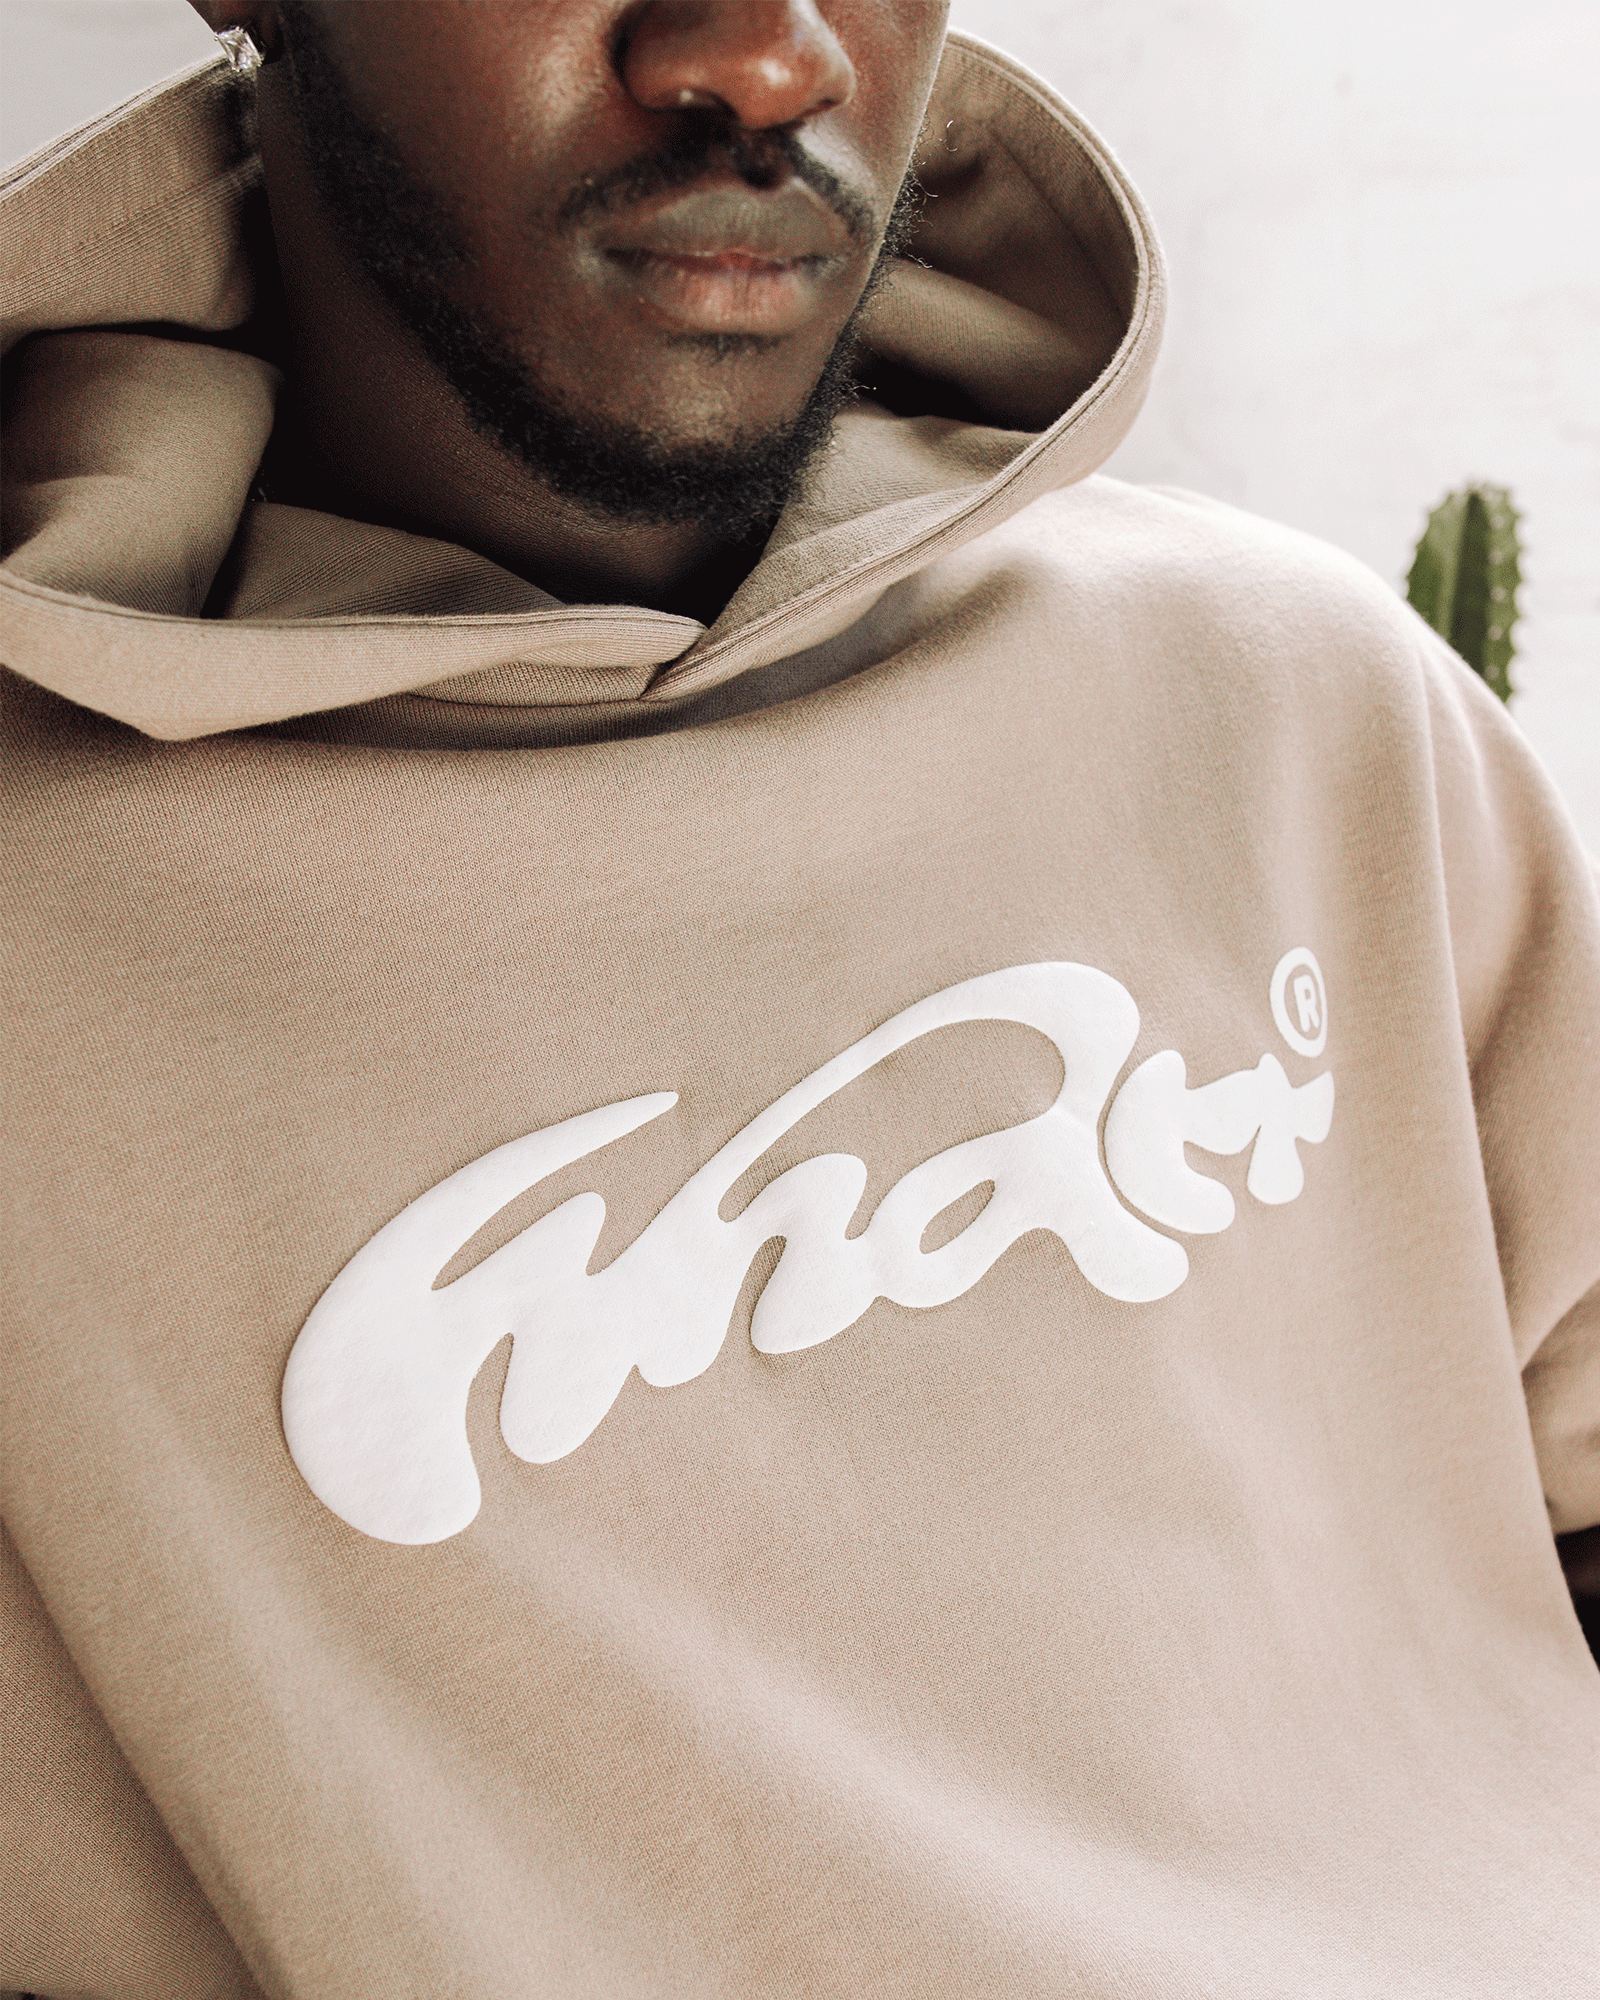 INFLUX HEAVY WEIGHT HOOD SWEAT - TAUPE